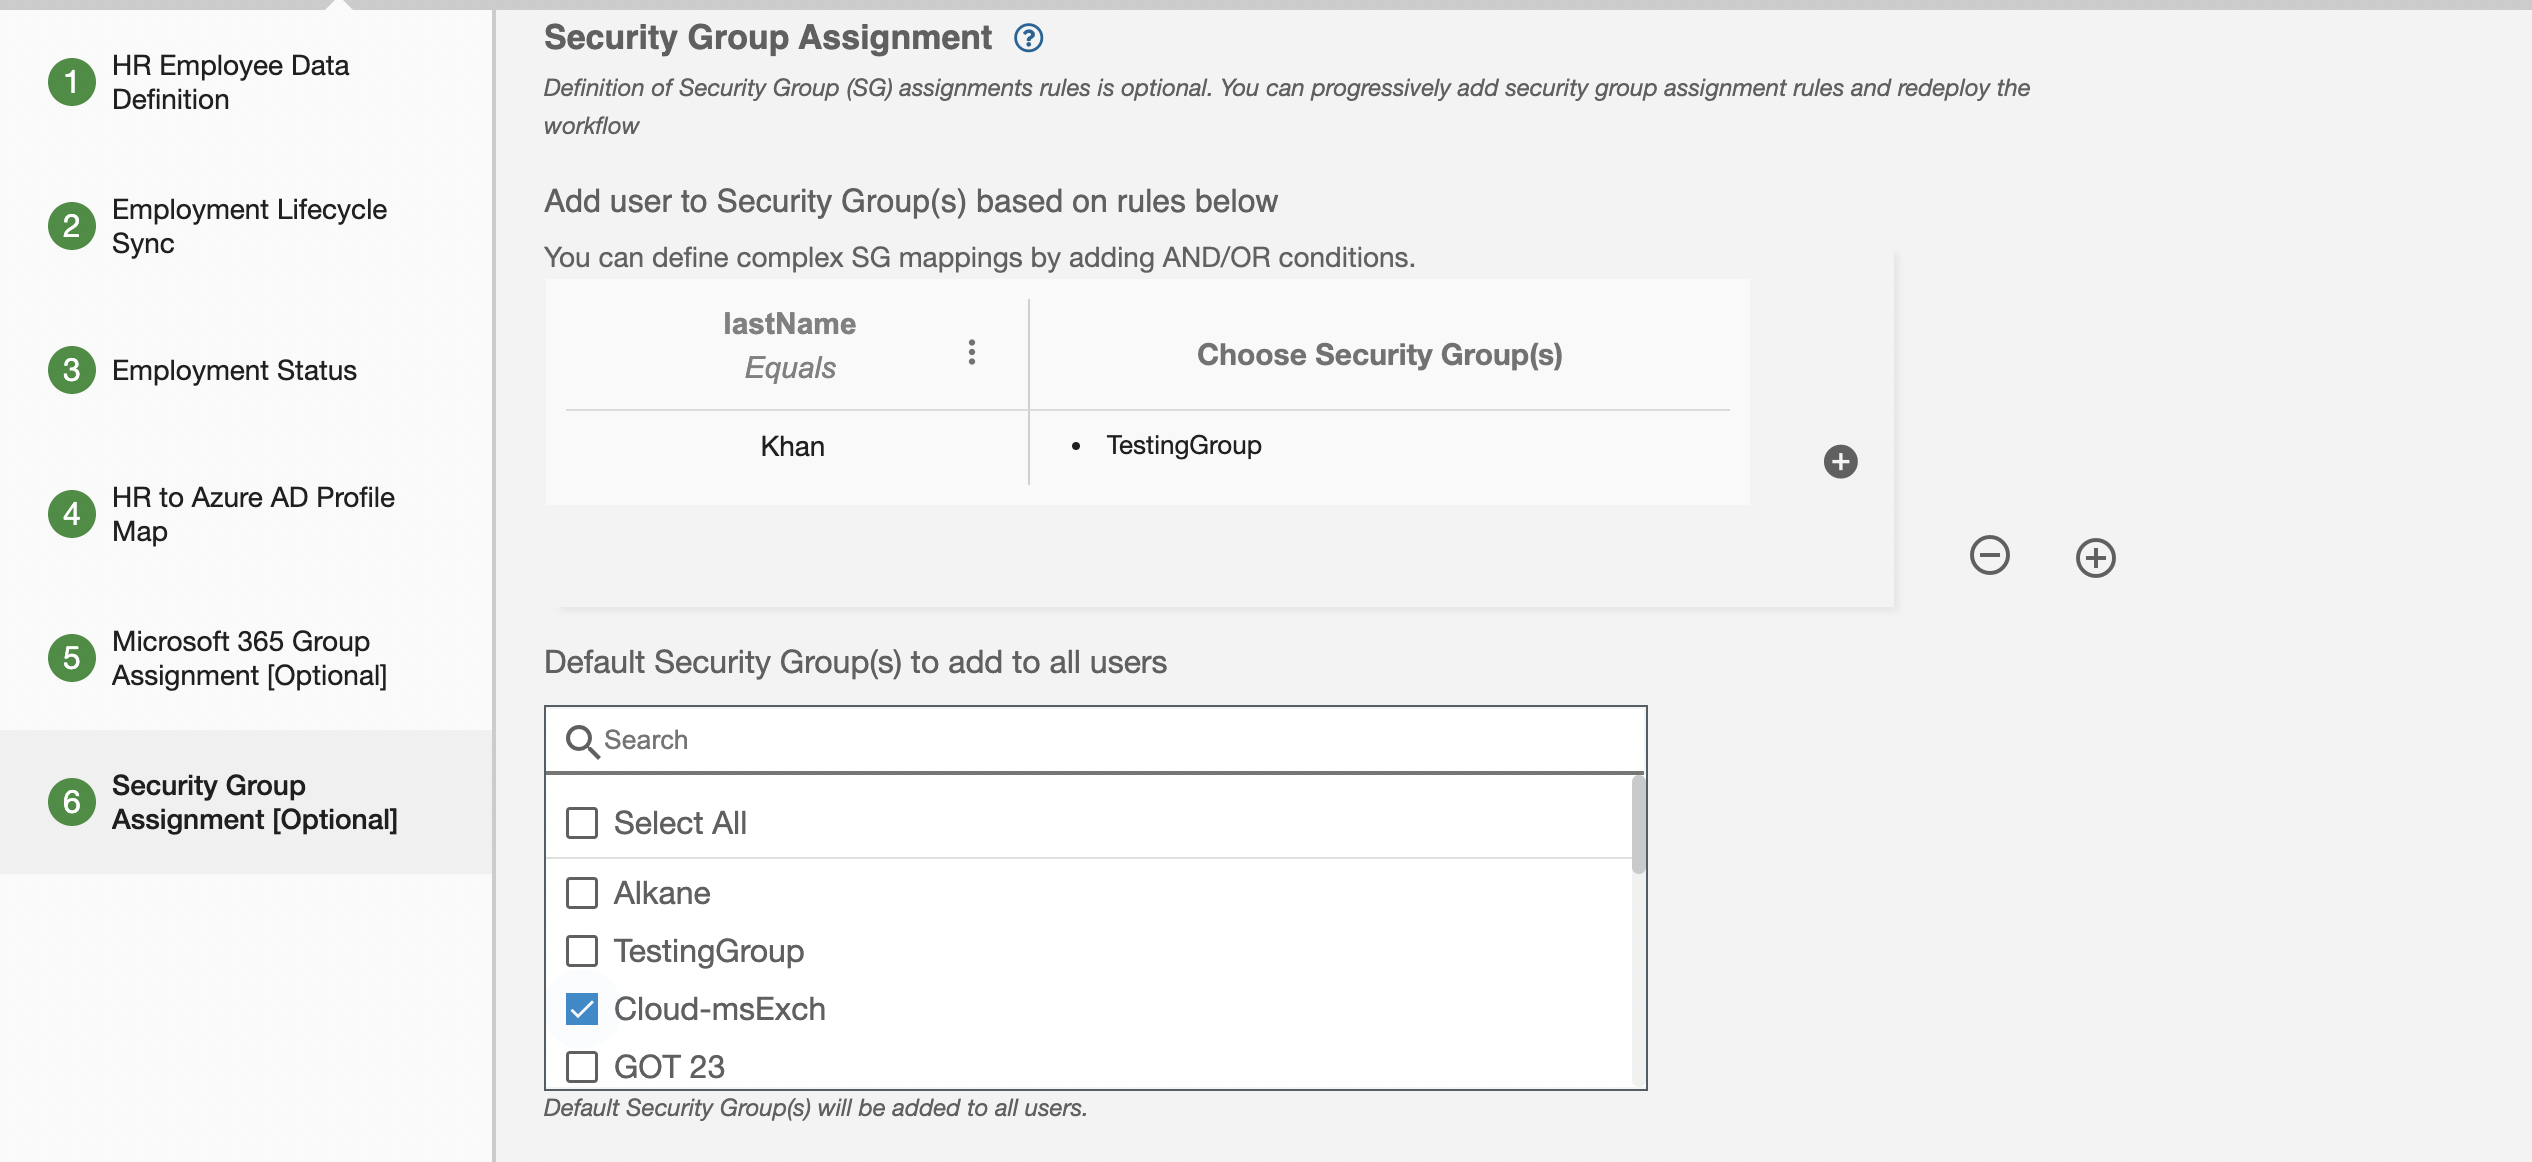 Security Group Assignment